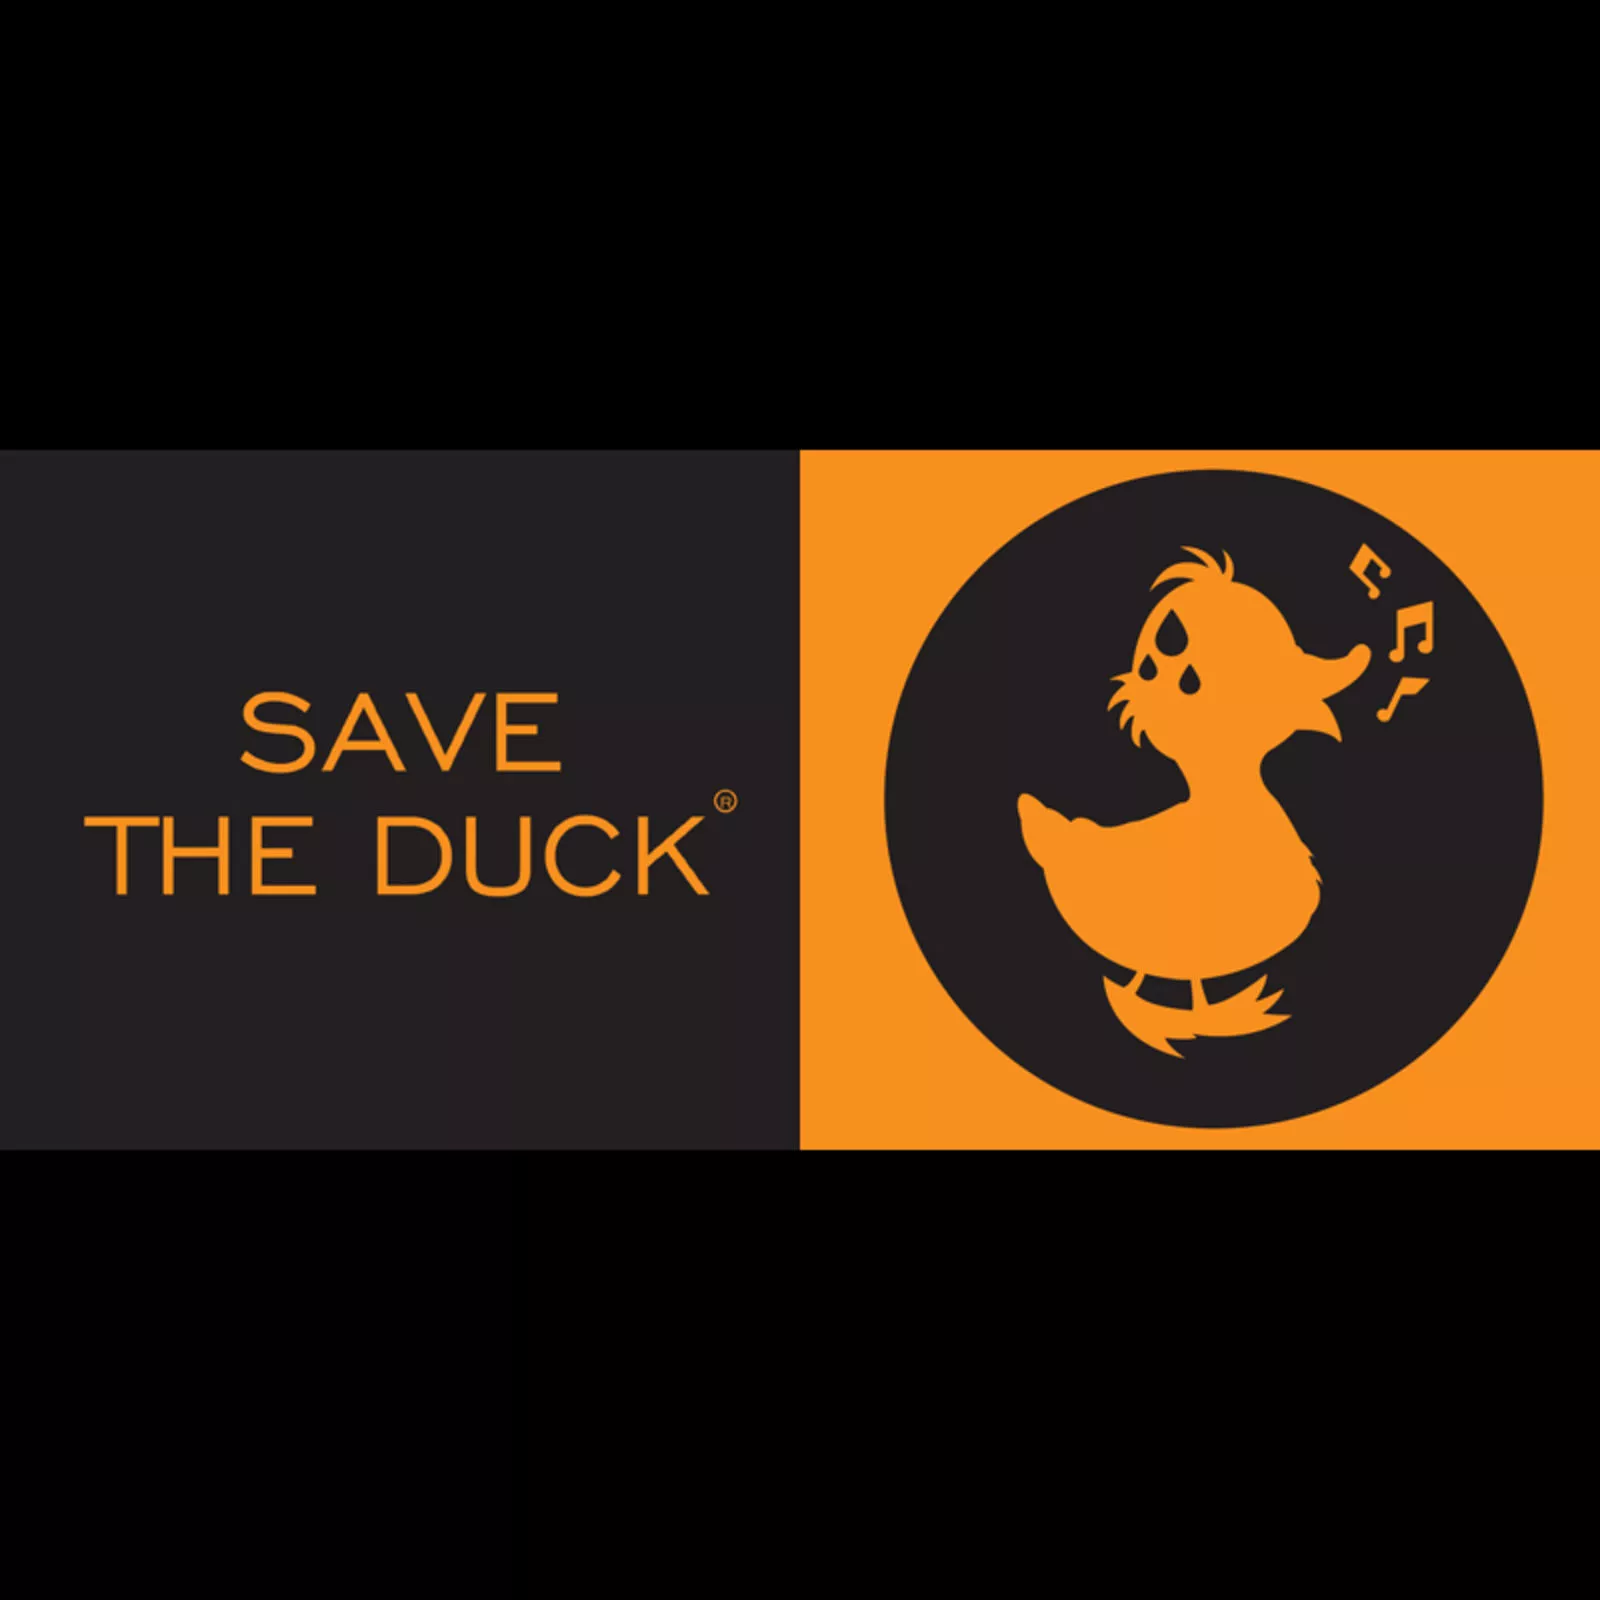 Save the duck 